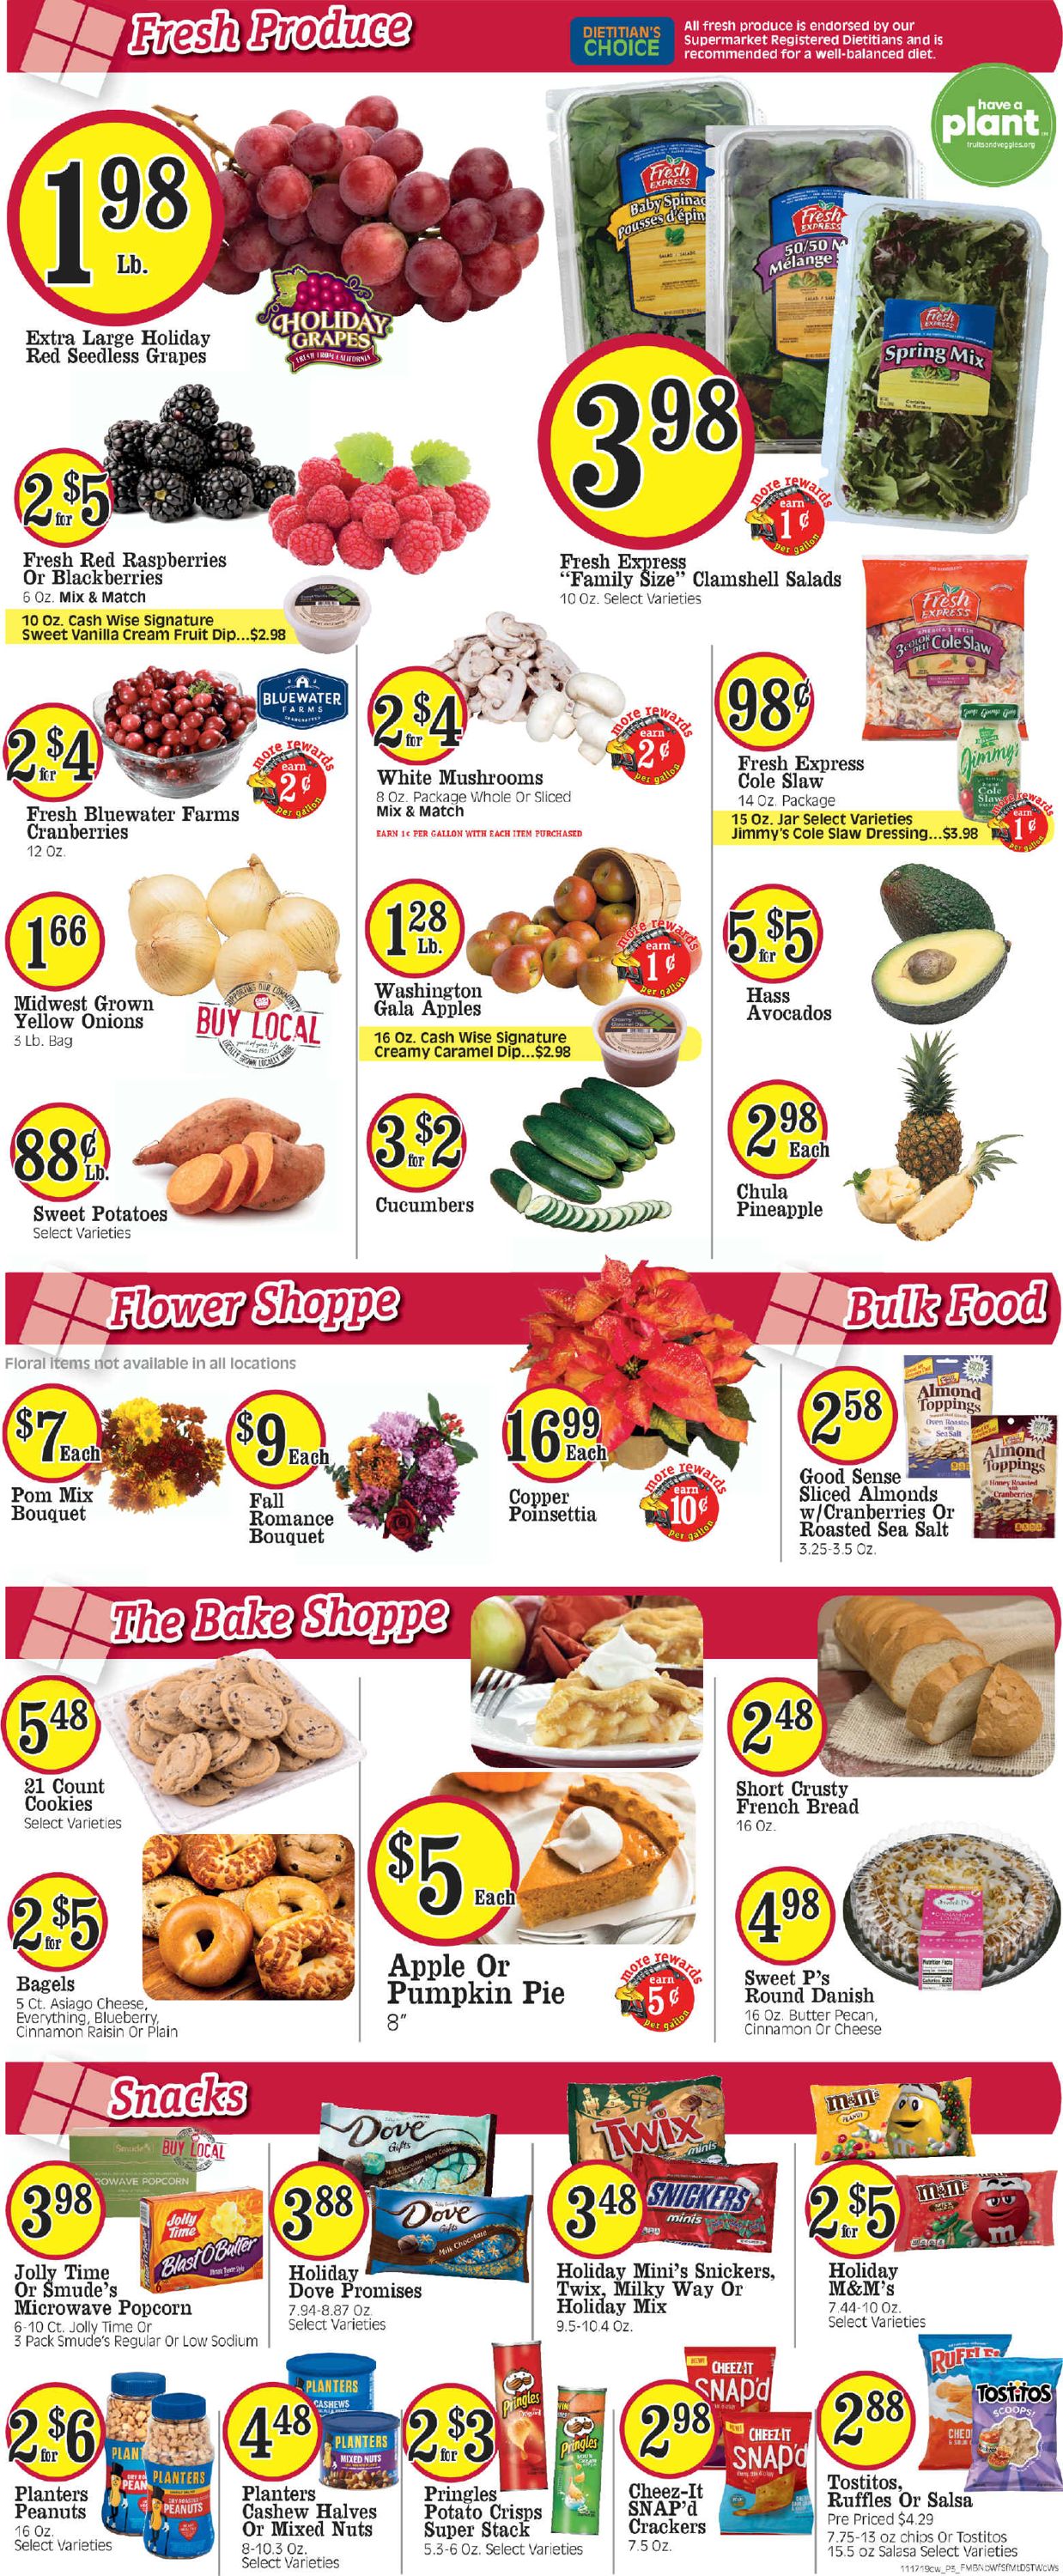 Cash Wise - Thanksgiving Ad 2019 Weekly Ad Circular - valid 11/20-11/26/2019 (Page 3)